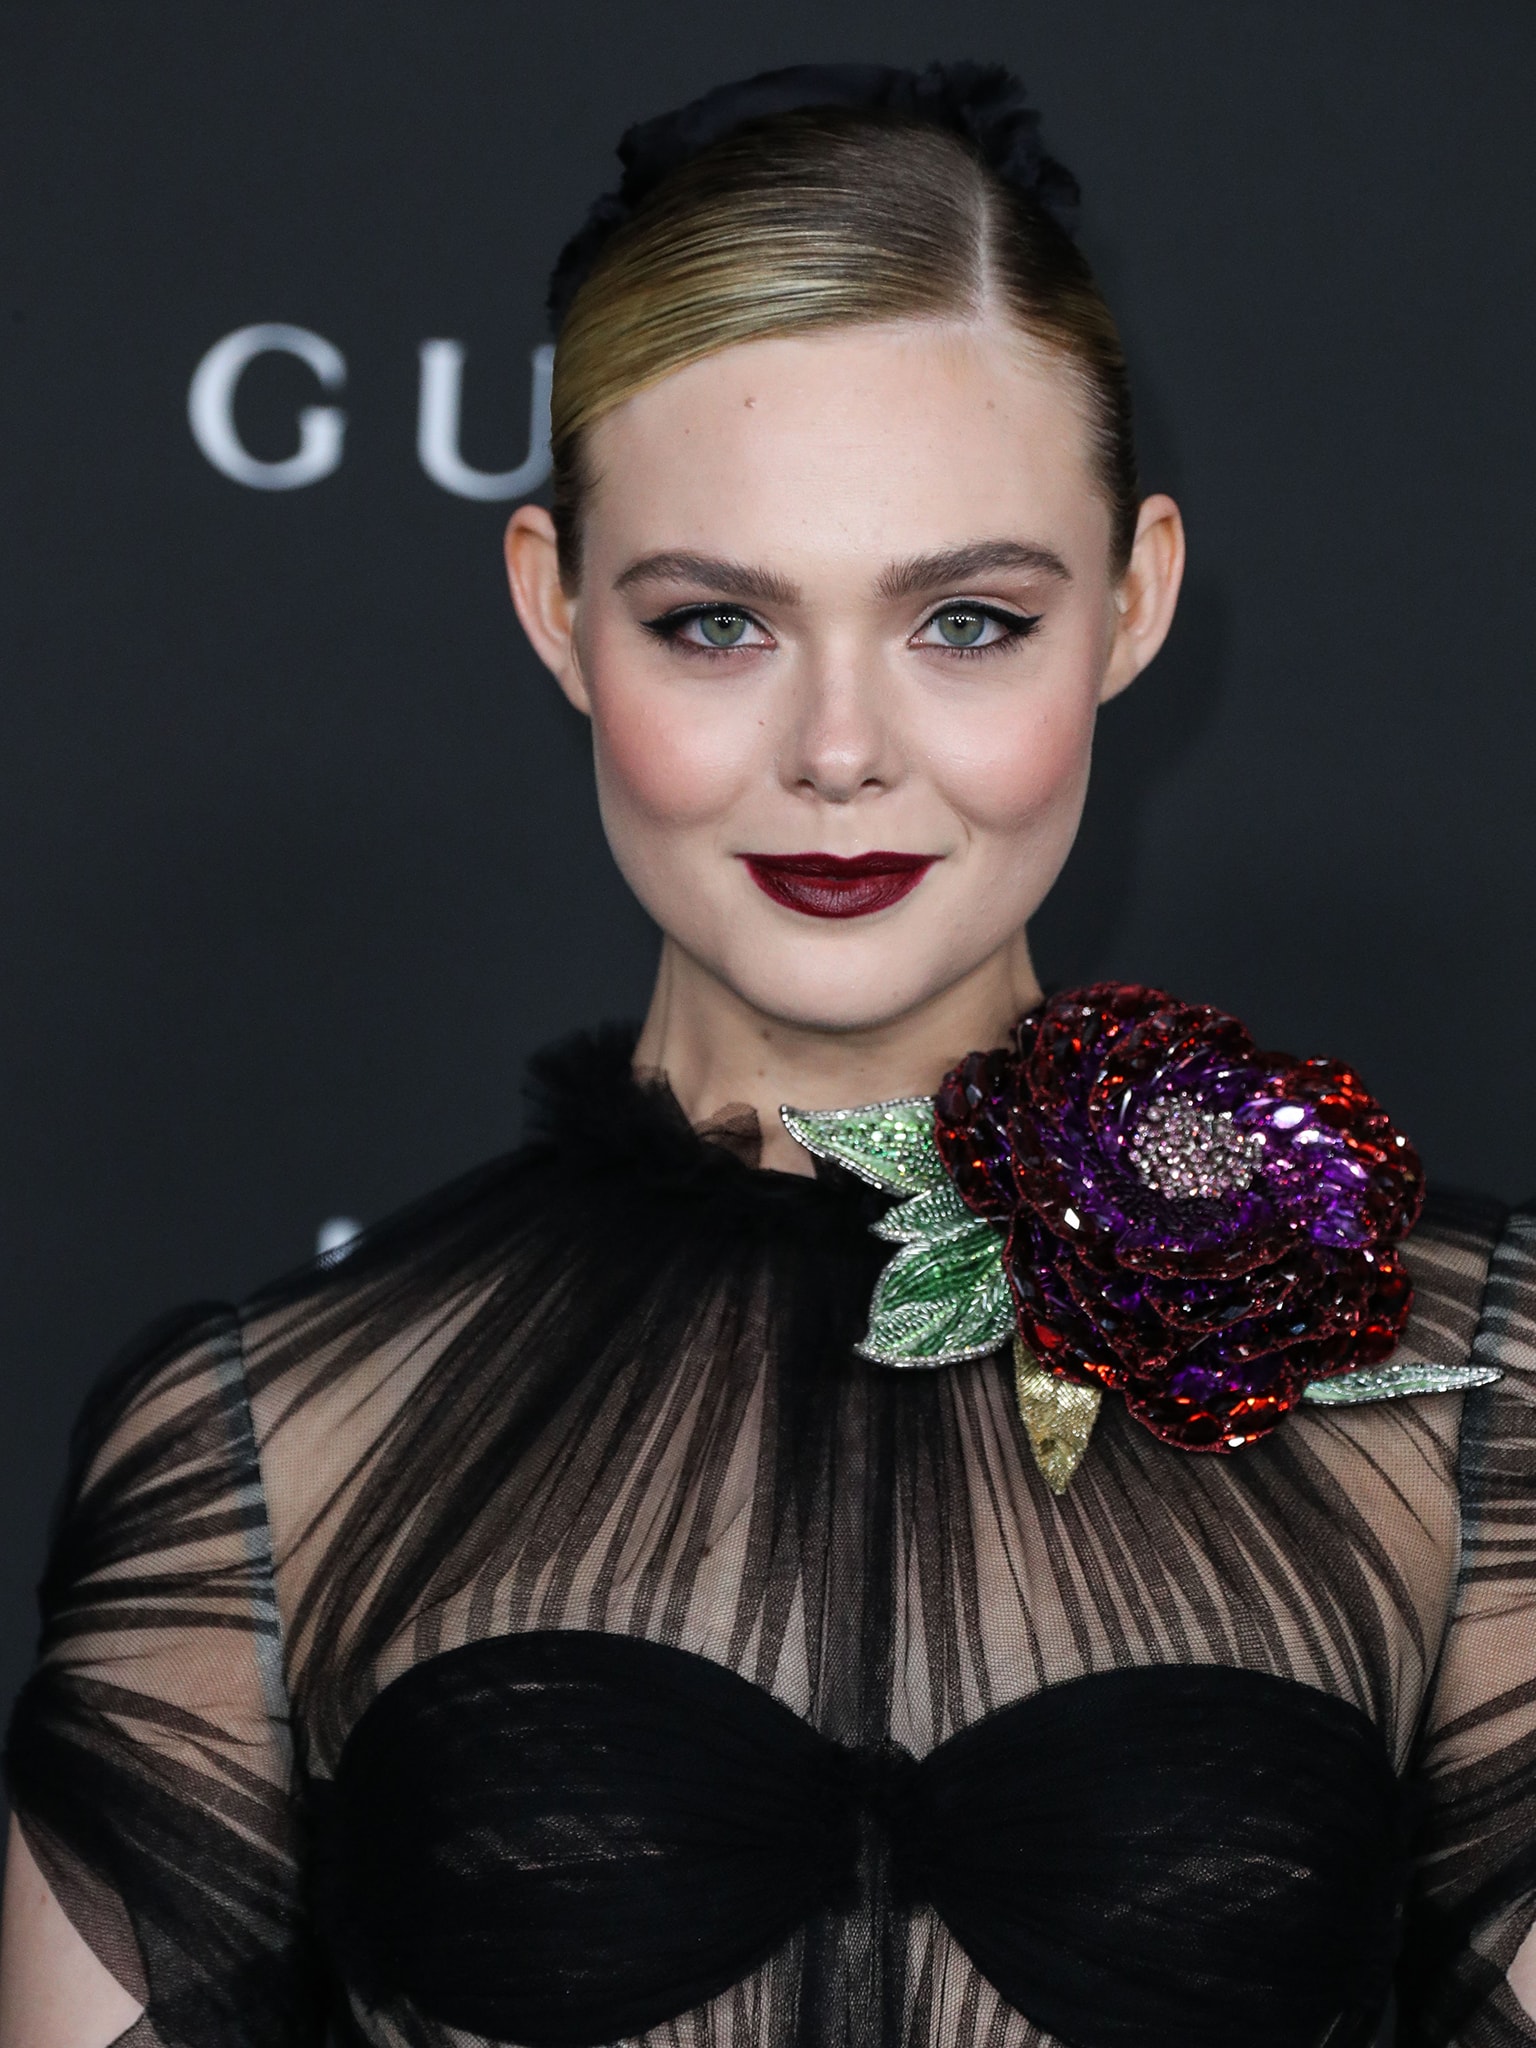 Elle Fanning wears tight hair bun and glams up further with winged eyeliner and a swipe of burgundy lipstick